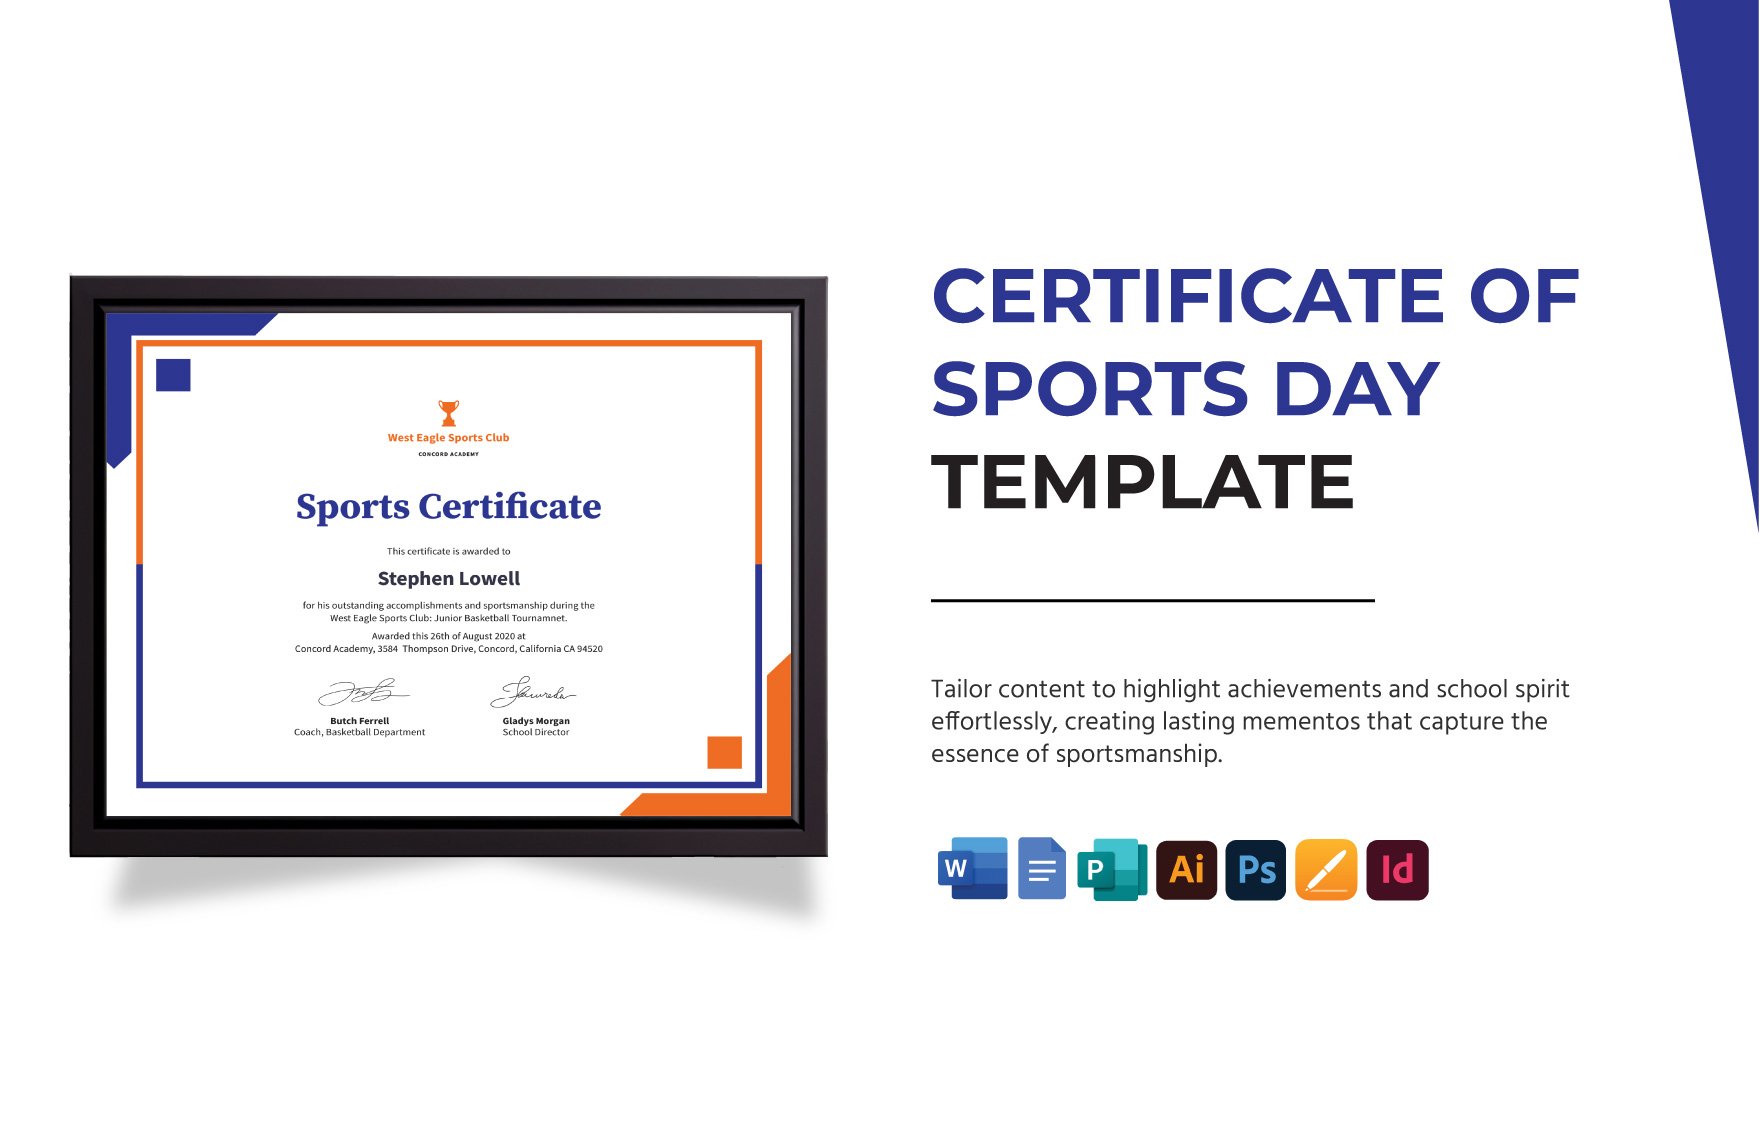 Certificate of Sports Day Template in Word, Google Docs, Illustrator, PSD, Apple Pages, Publisher, InDesign